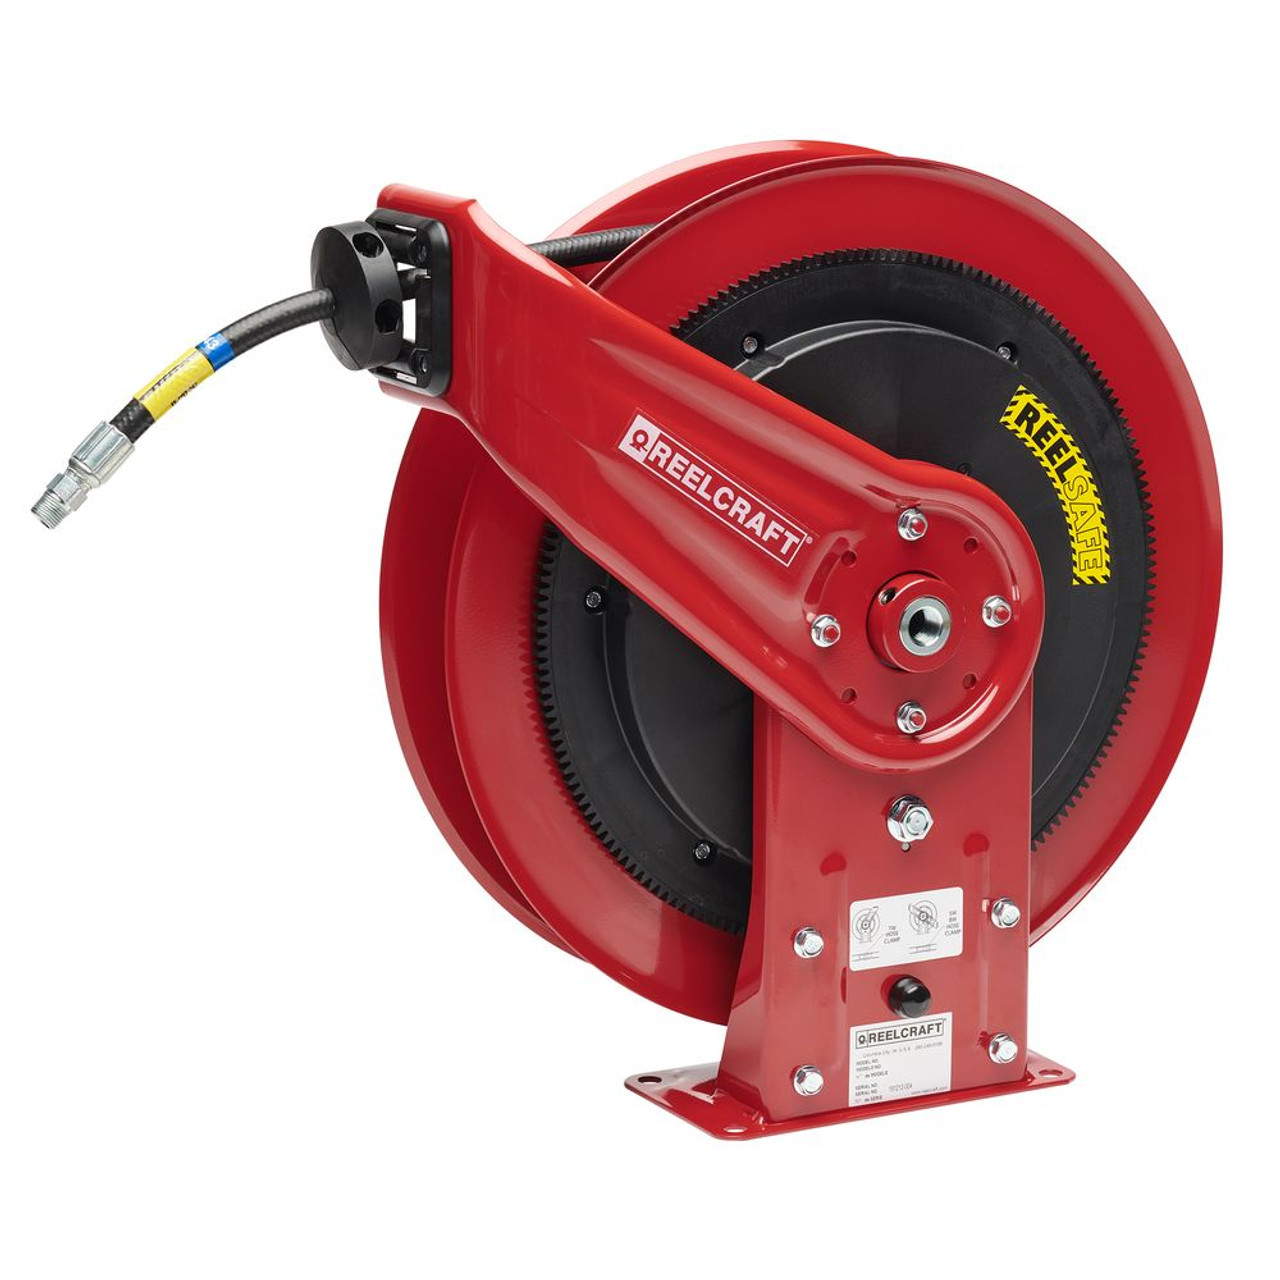 Reelcraft-rs7450 Ohp 1/4 in. x 50 ft. REELSAFE Hose Reel